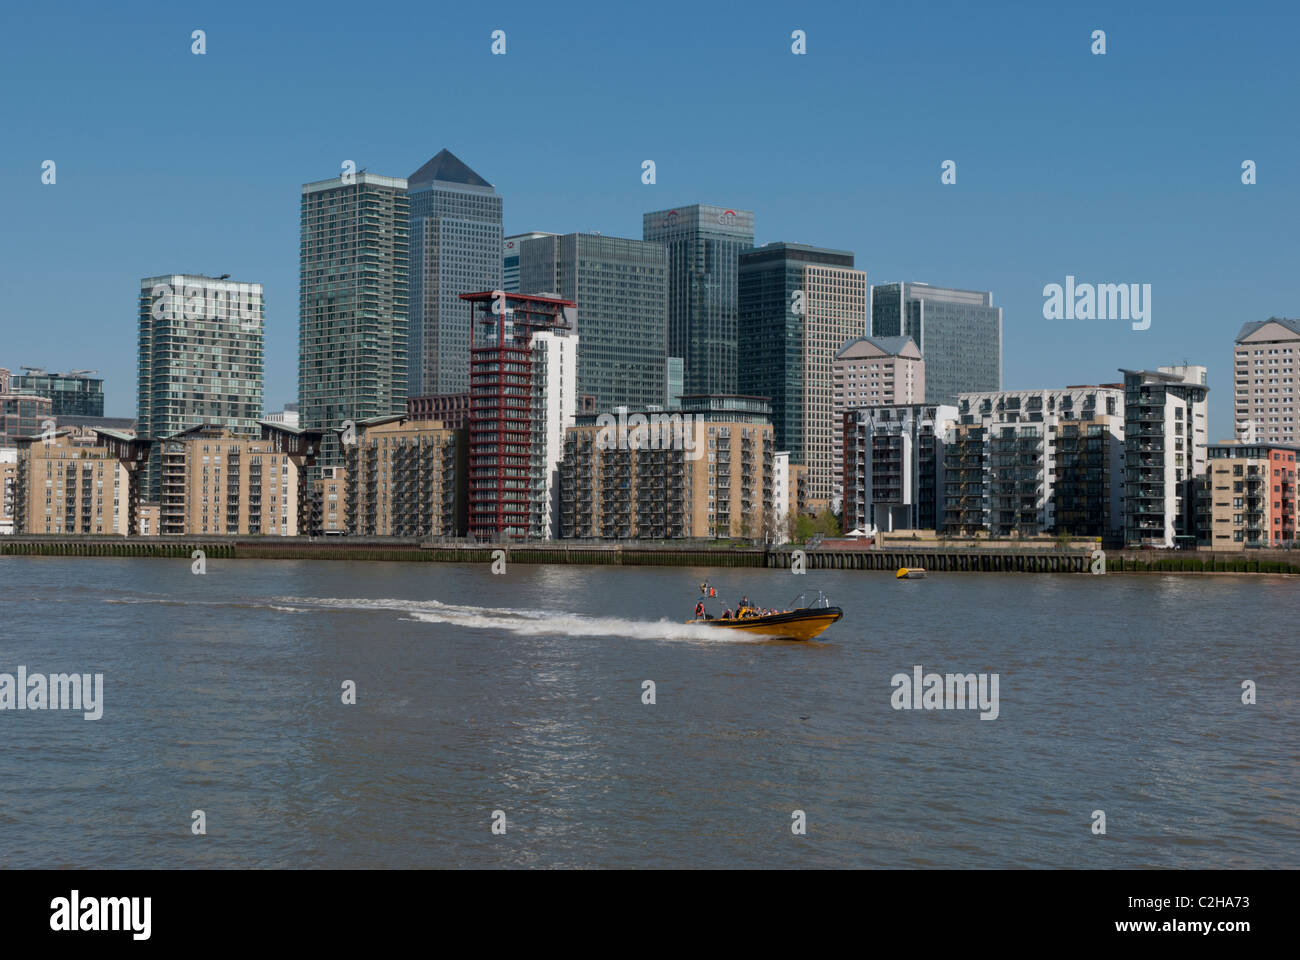 The view of Canary Wharf in The City of London from across The River Thames in Rotherhithe. Stock Photo